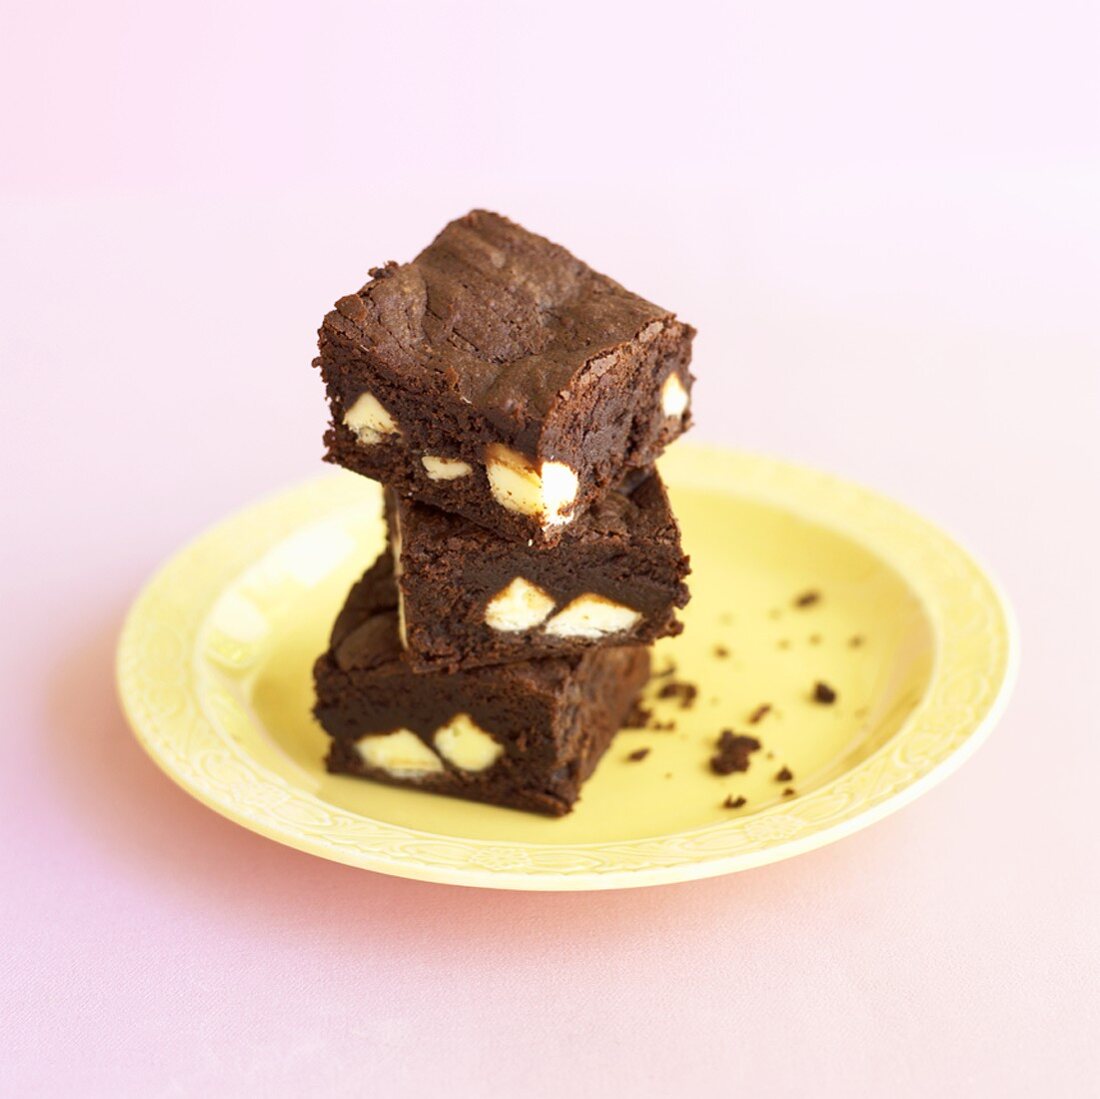 A pile of three brownies on a plate